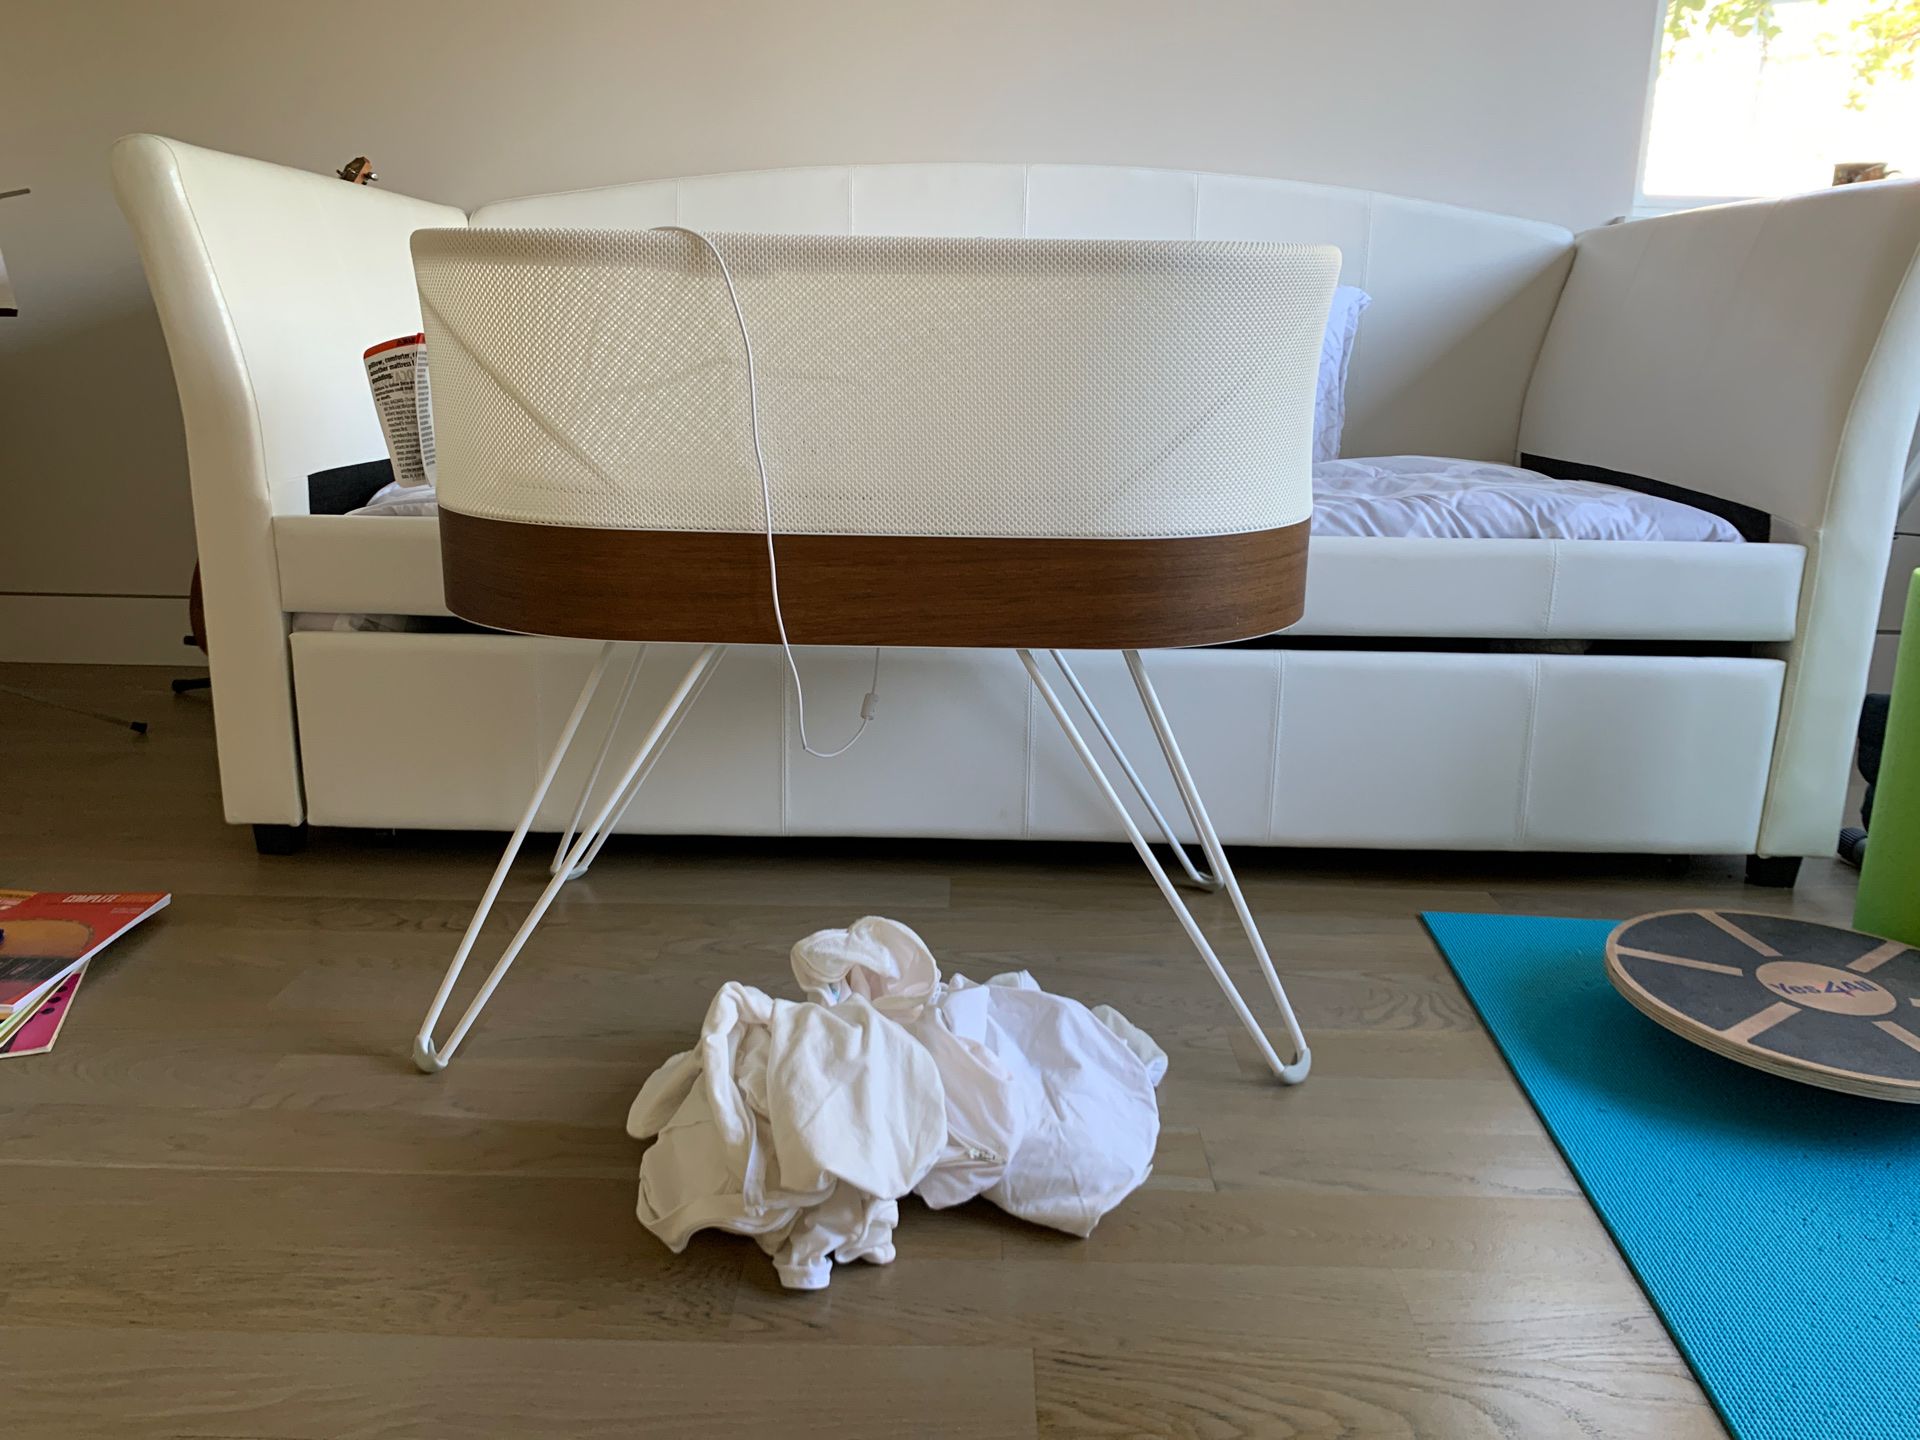 SNOO bassinet with extra swaddles